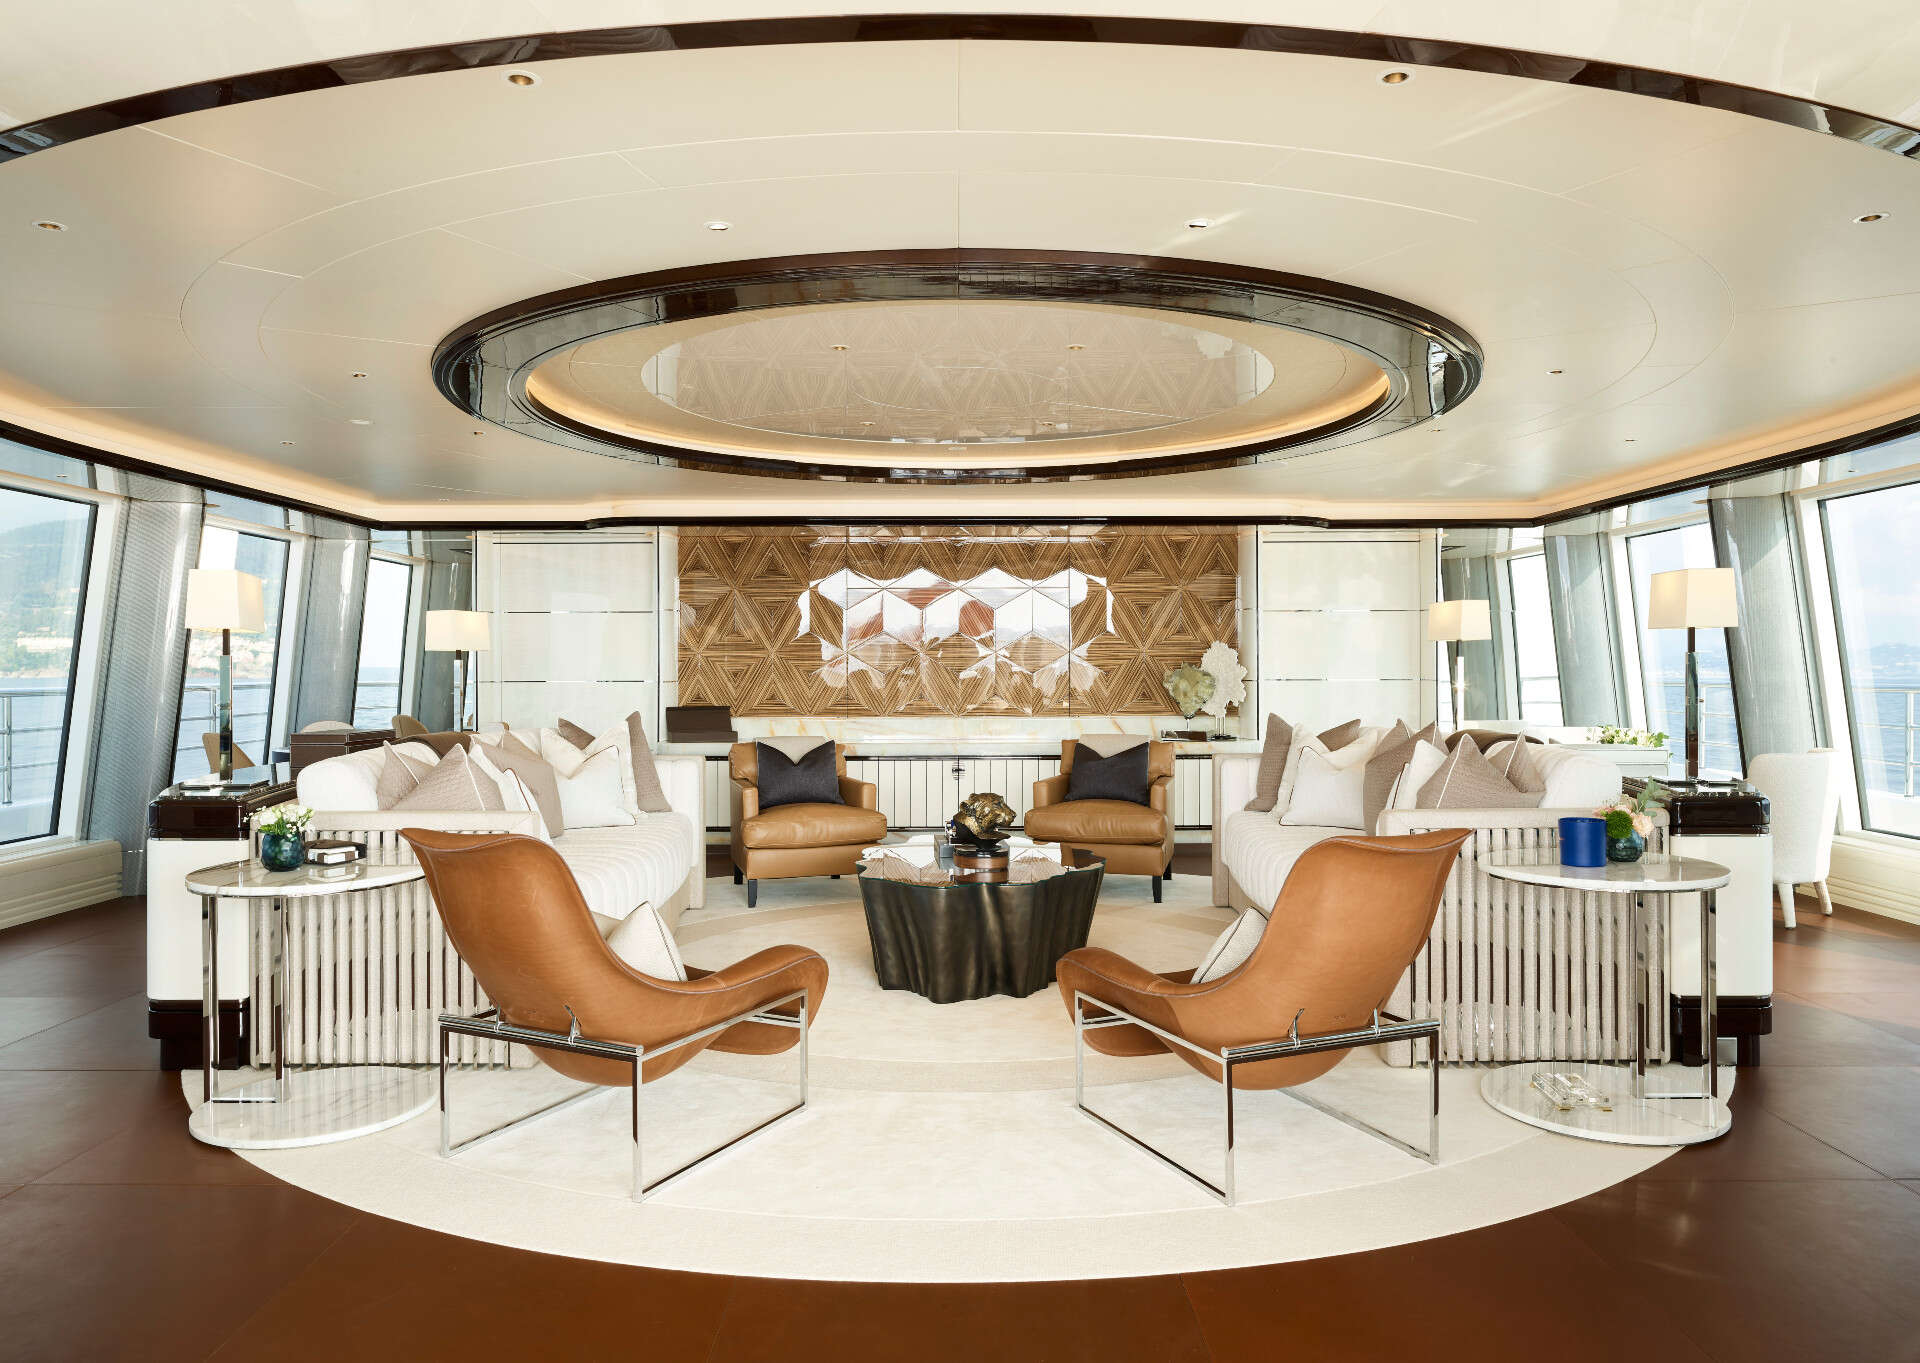 A guide to superyacht design features